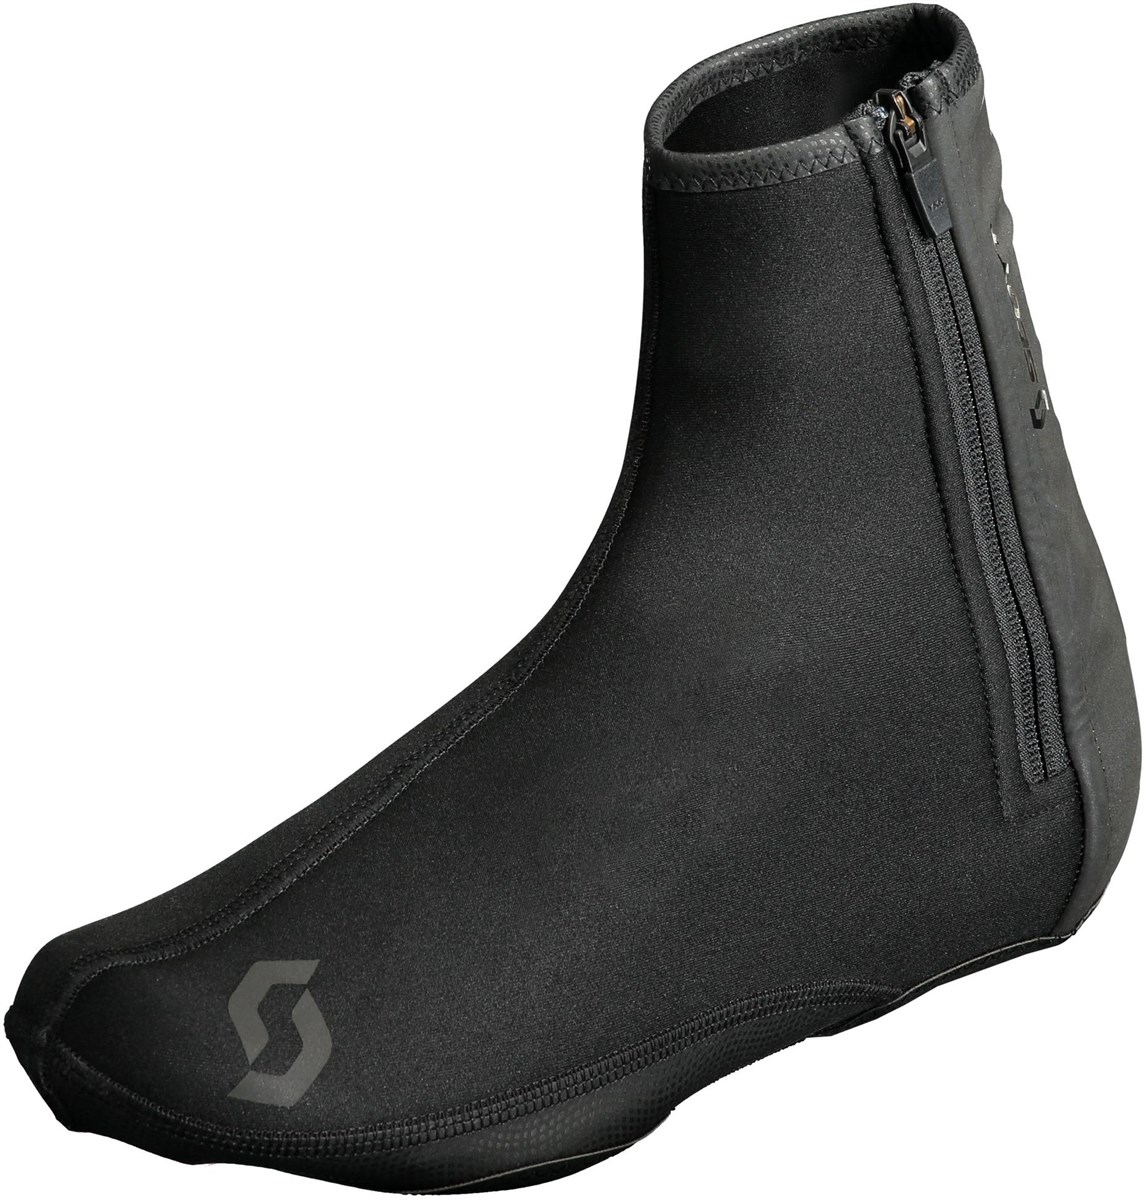 Scott AS 10 Shoecovers product image